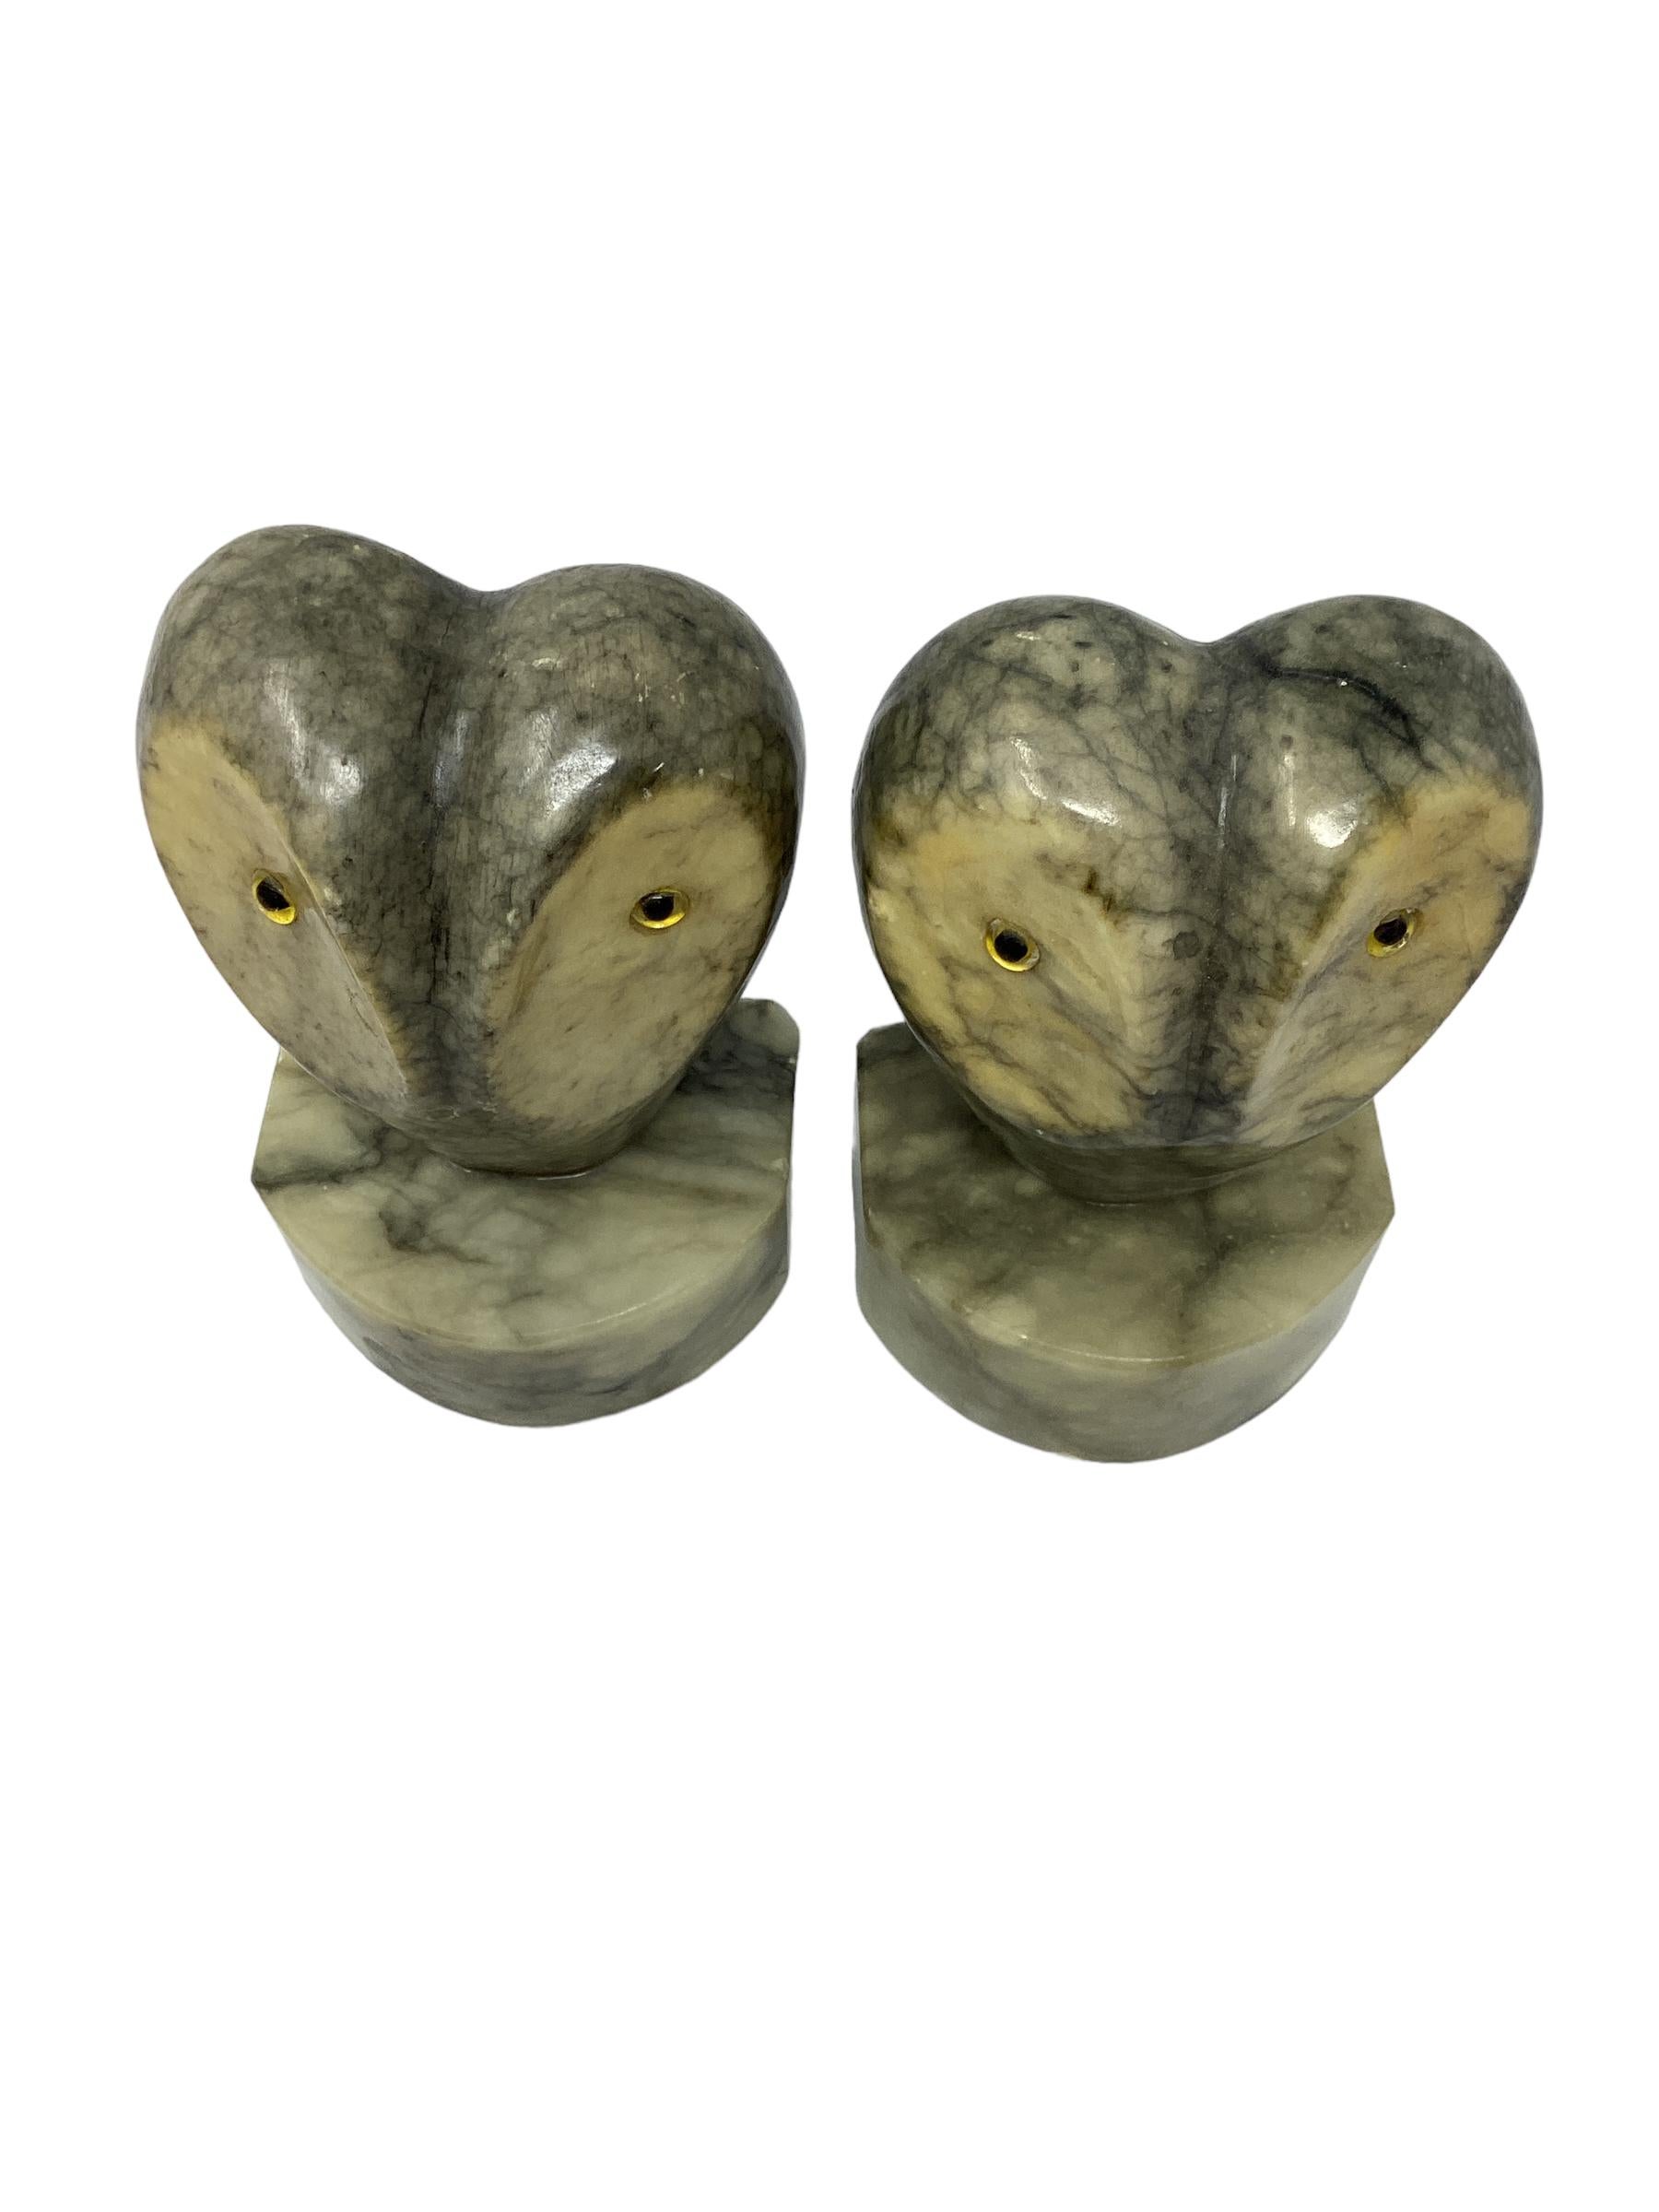 Vintage Italian Alabaster Owl Bookends. Expressive faces with glass eyes gives these bookends a striking presence.